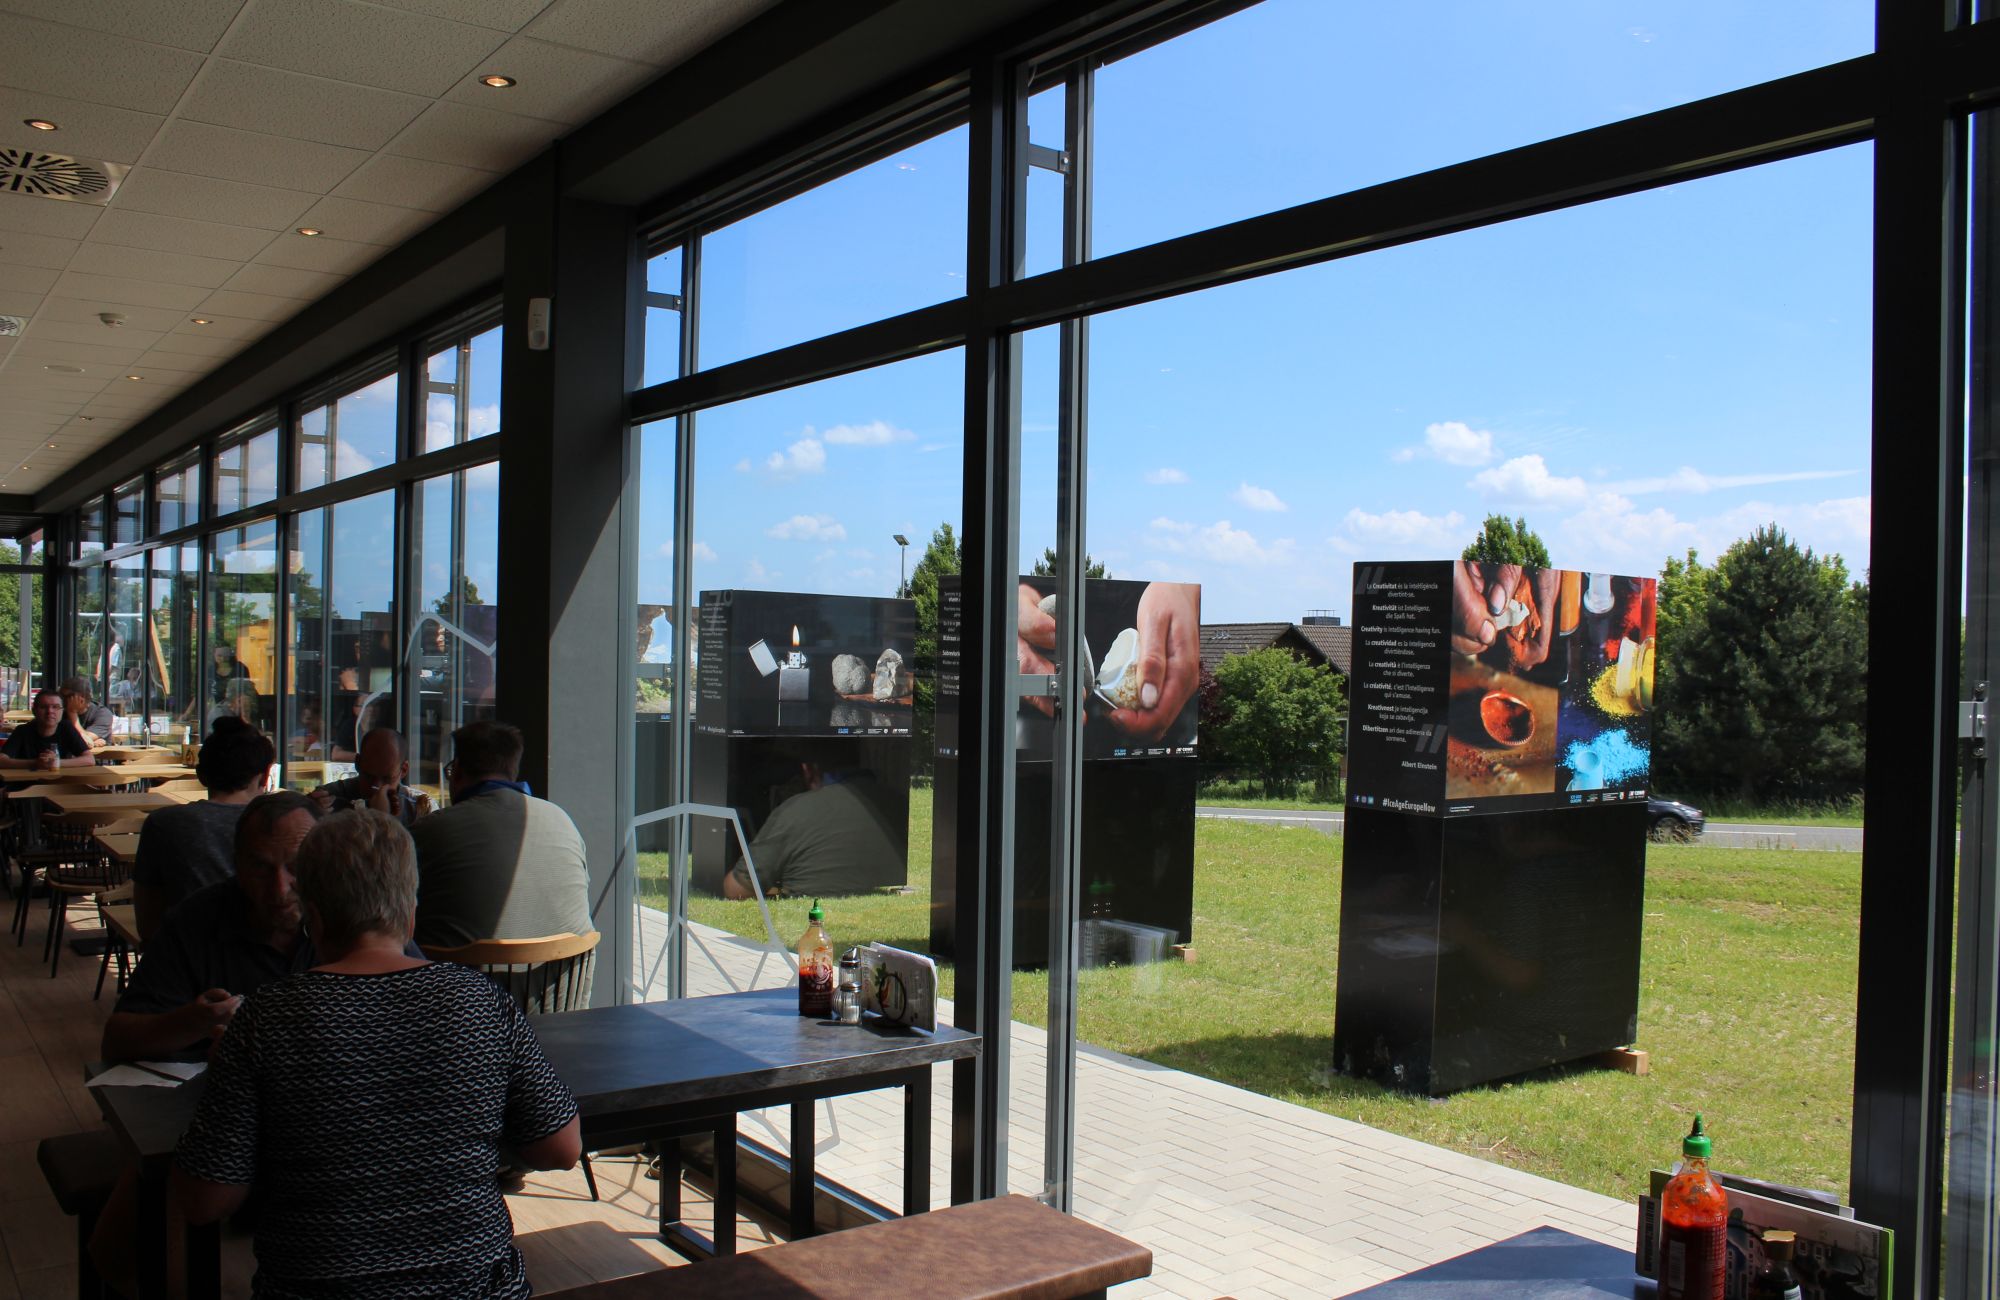 View of some large photo panels outside from the inside of a shopping mall cafe